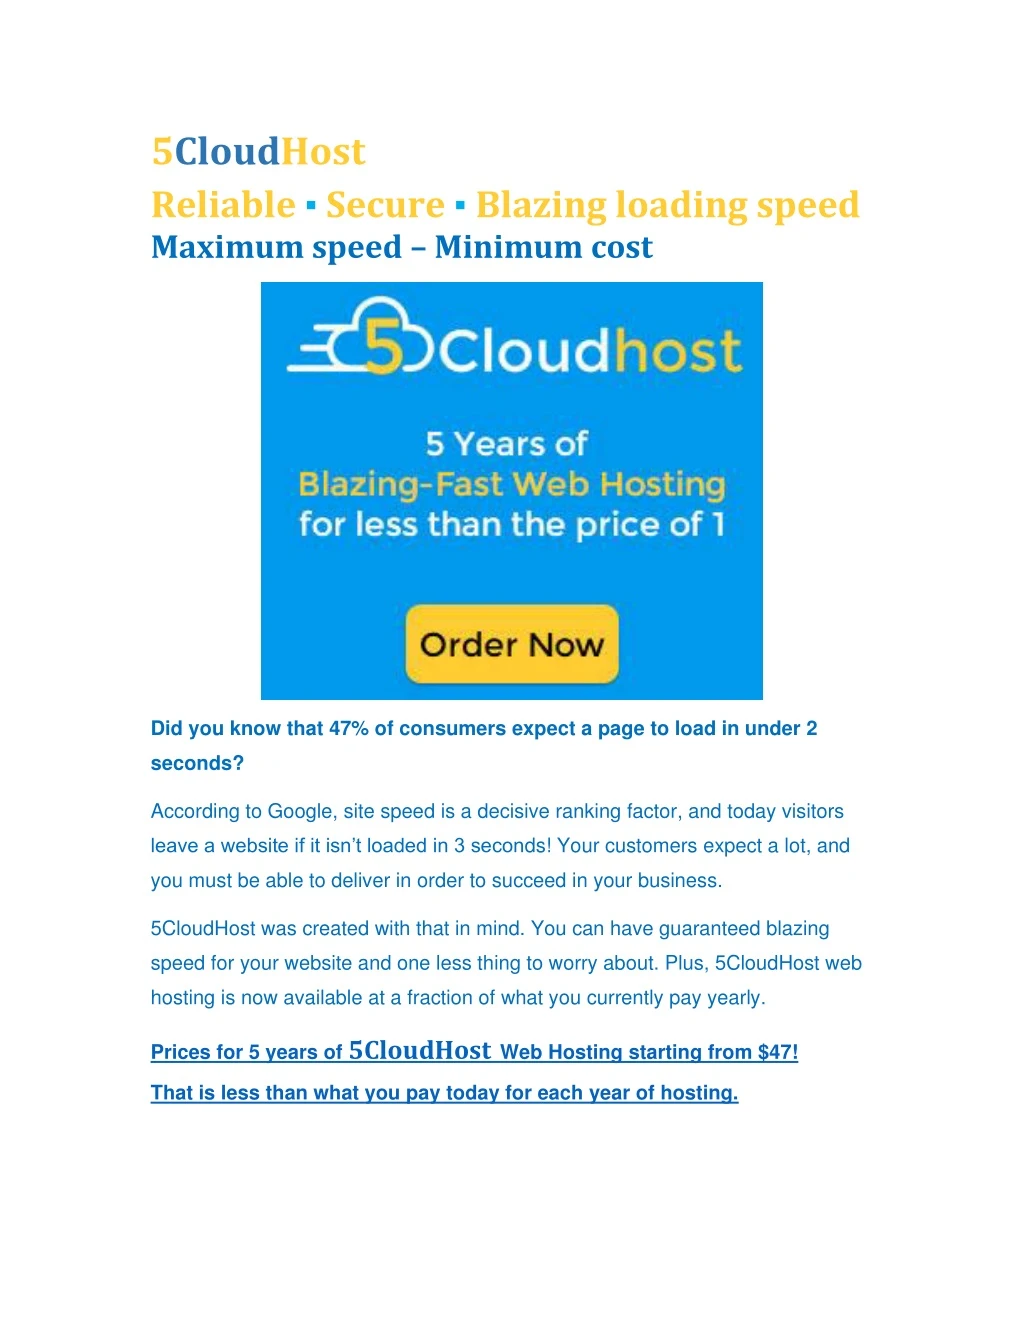 5cloudhost reliable secure blazing loading speed